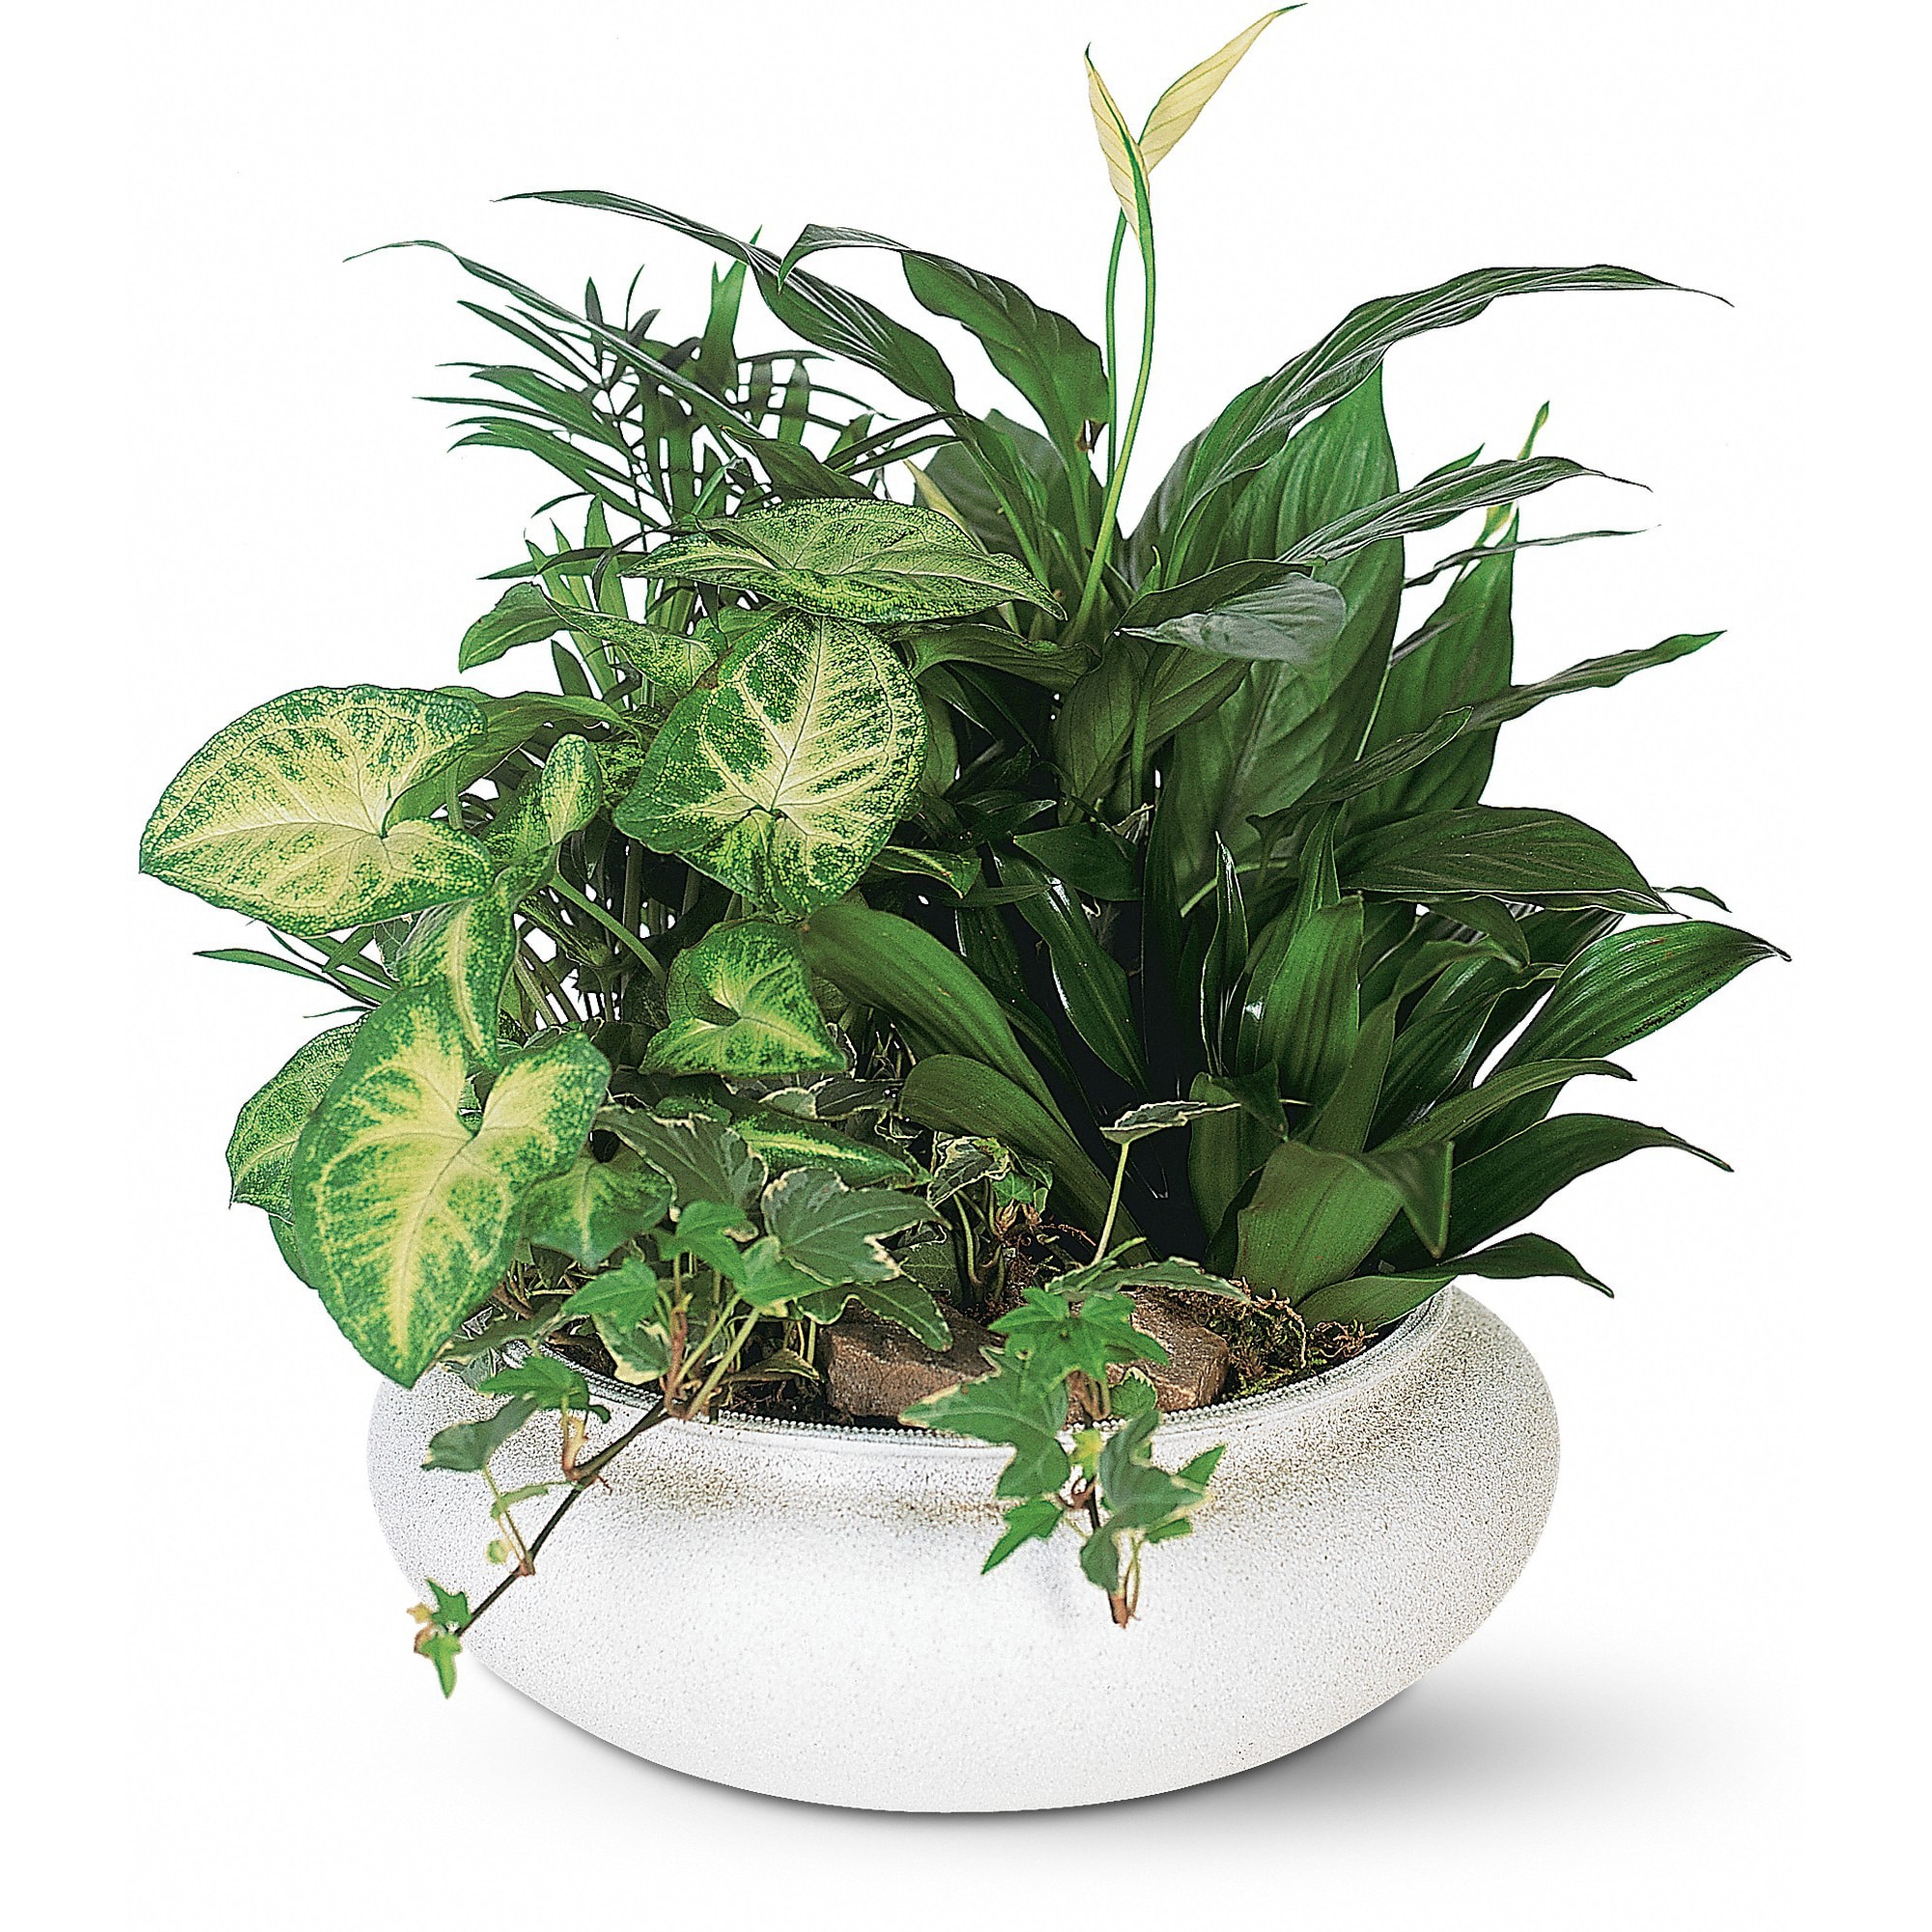 Medium Dish Garden by Teleflora - This low bowl filled with living plants will also carry comfort and compassion for many months to come. Perfect to send to the home or service. 